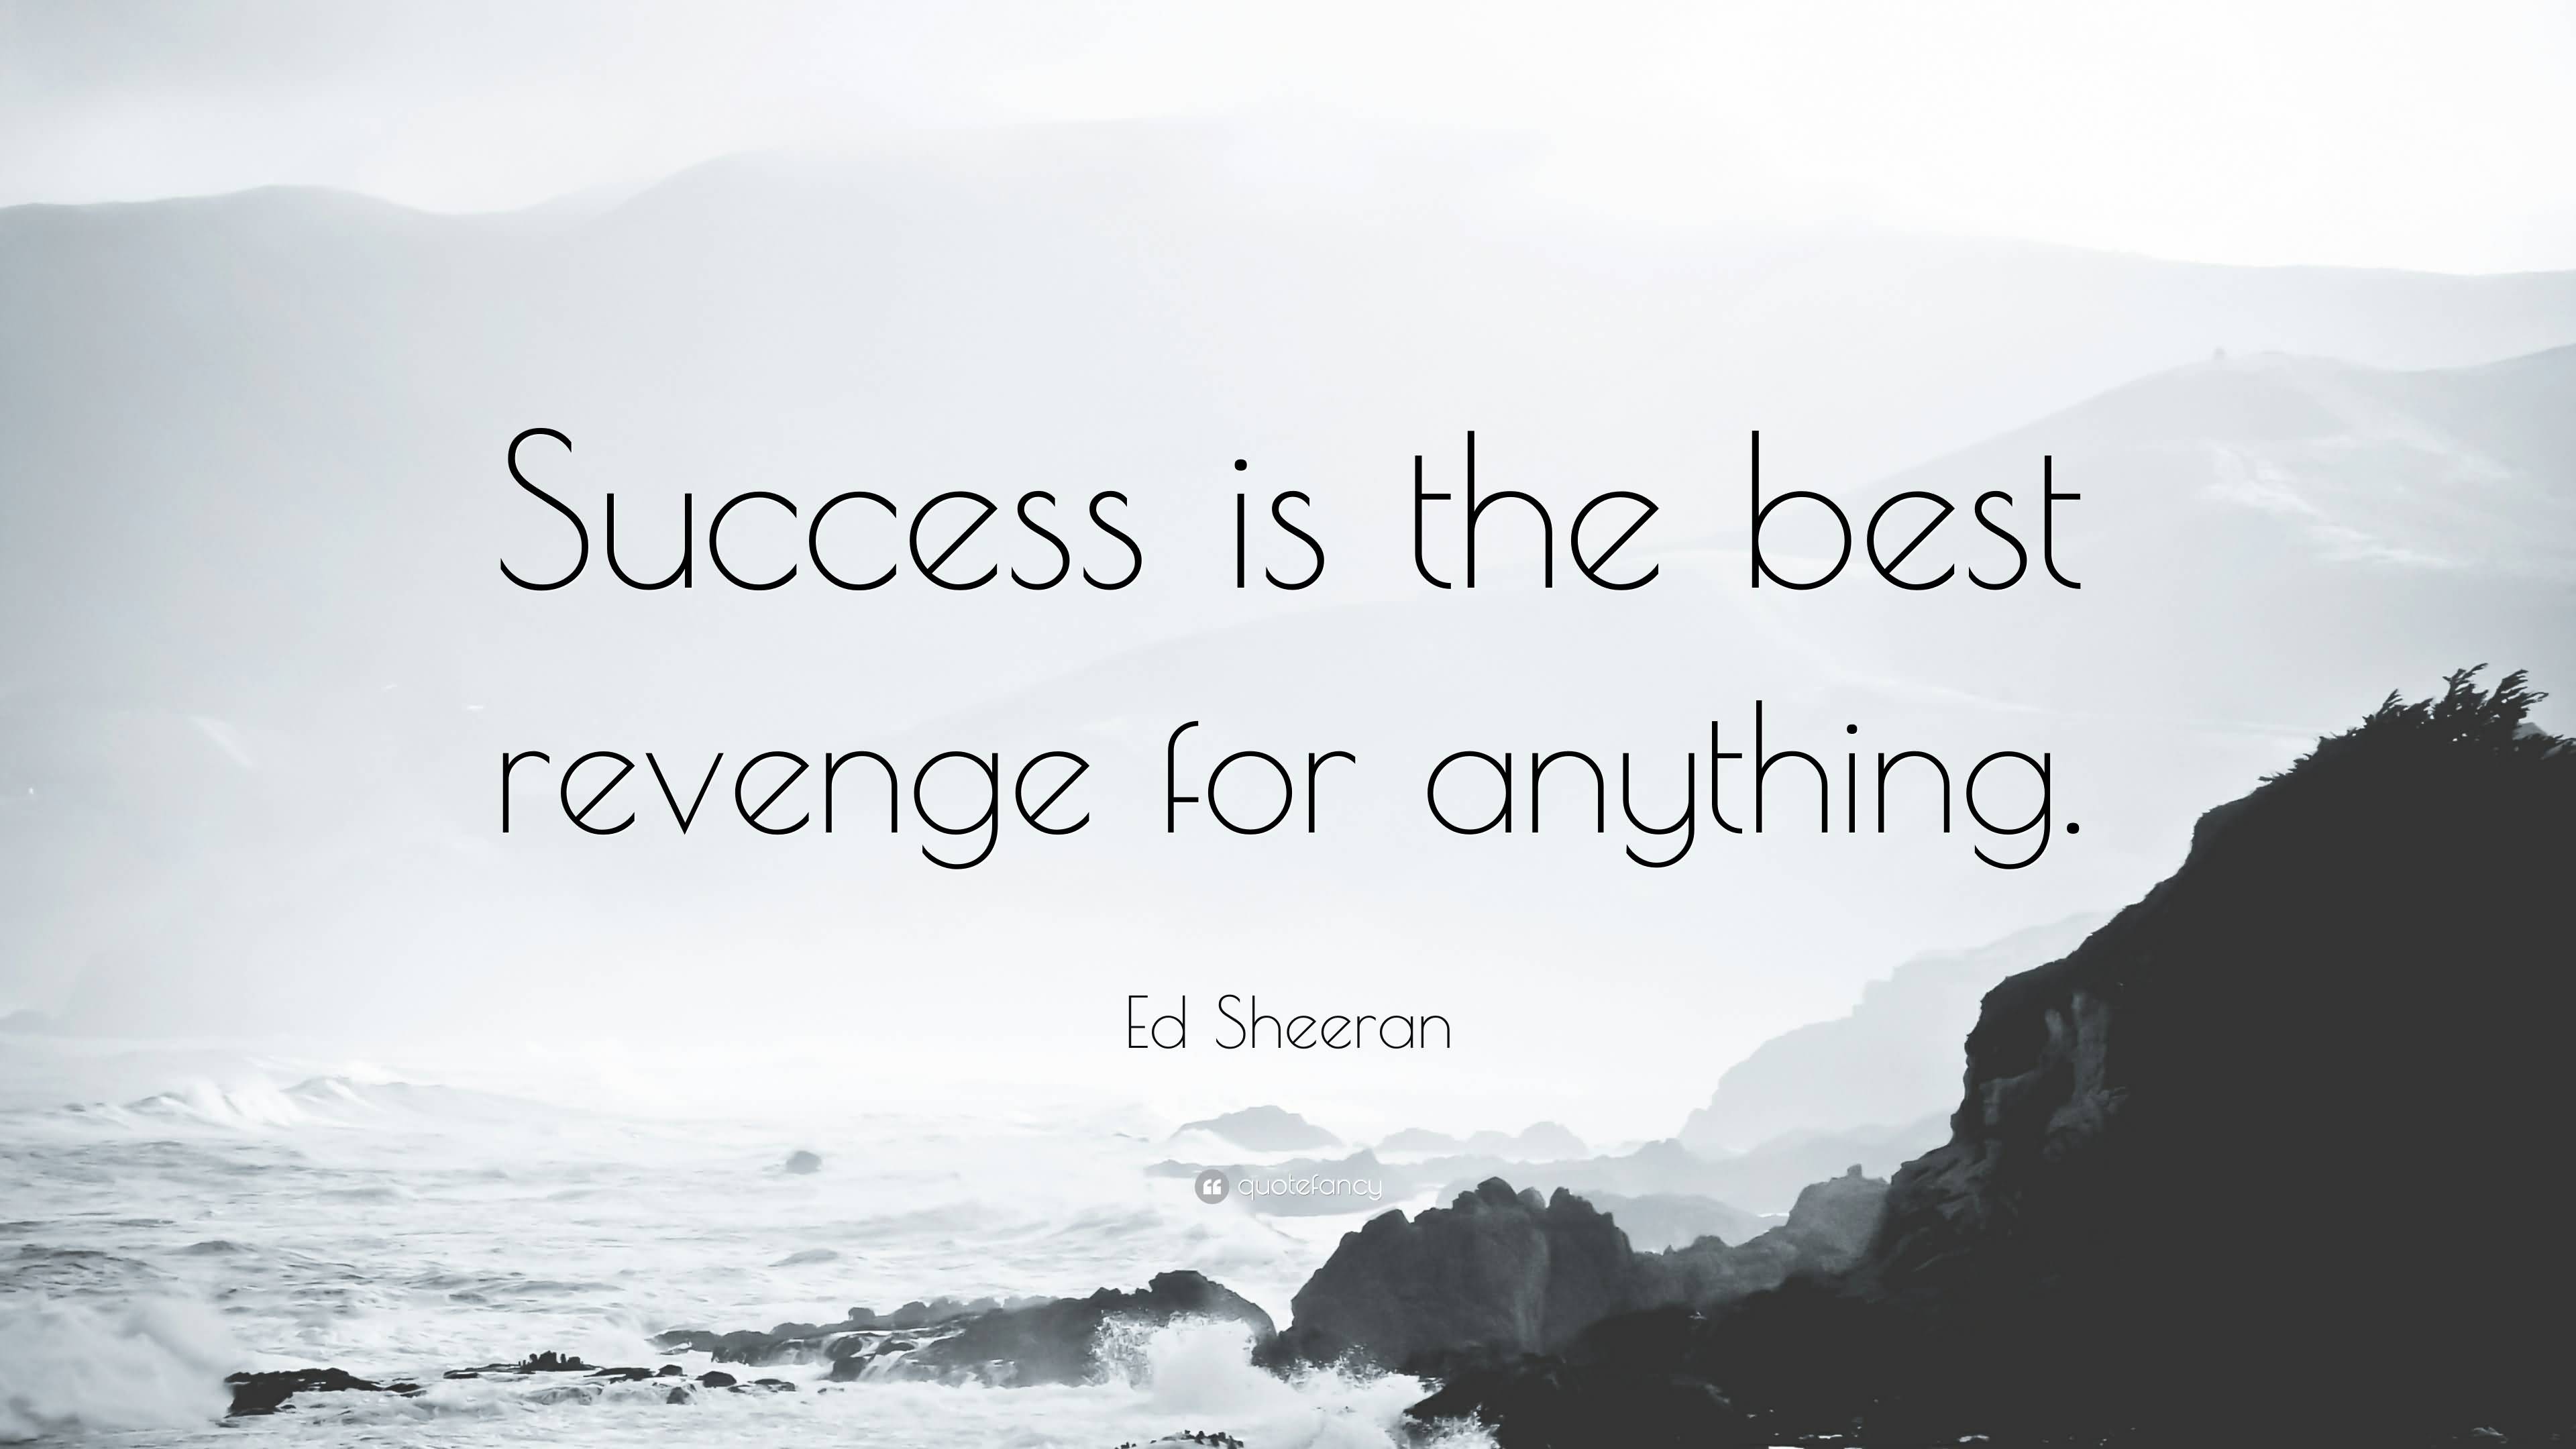 21 Ed Sheeran Quotes and Sayings Collection